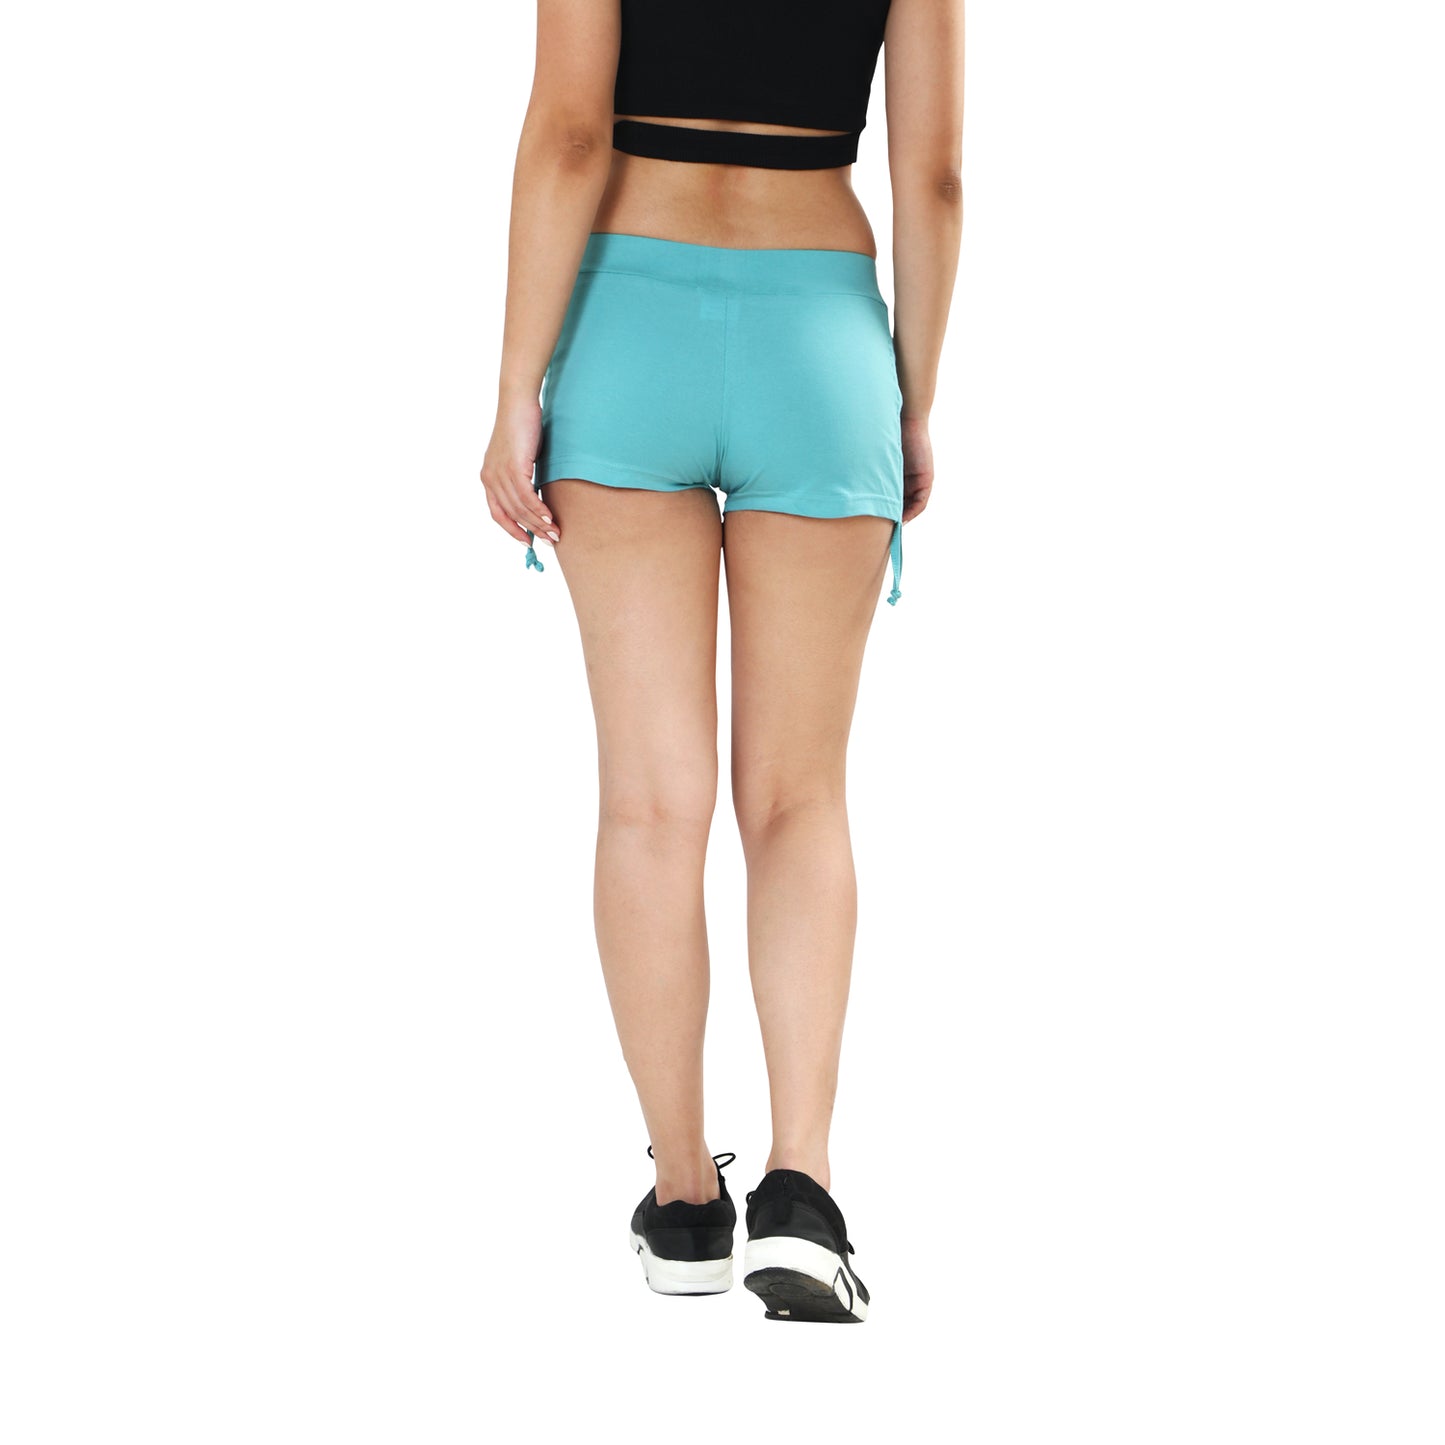 TWGE Women Cotton Hot Shorts - Short Pants for Ladies - Ideal for Gym Yoga & Nightwear - Color Turquoise Blue